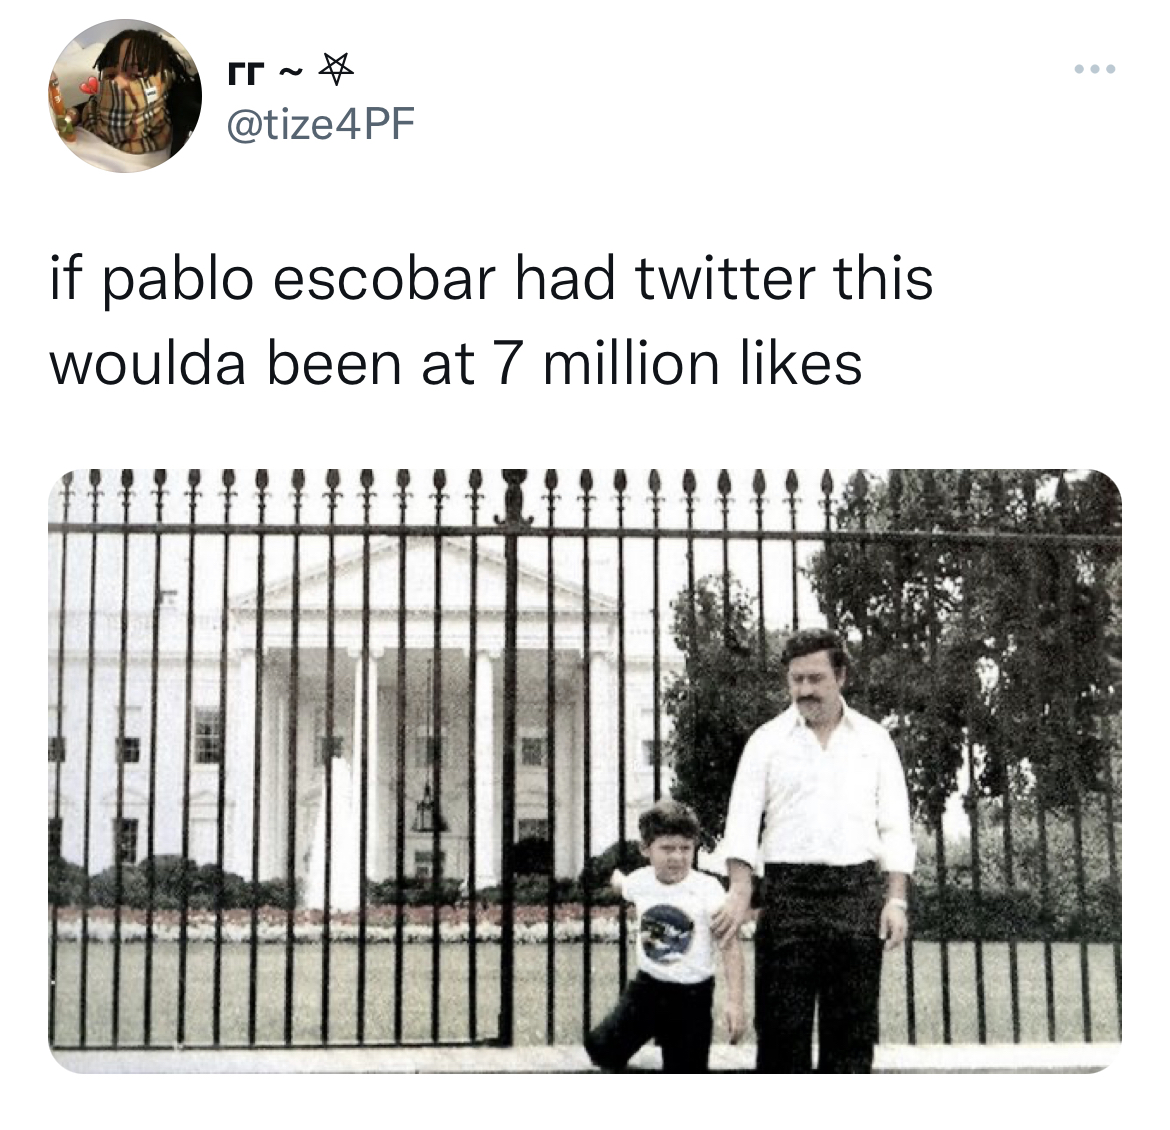 Fresh and funny tweets - pablo escobar in front of white house meme - if pablo escobar had twitter this woulda been at 7 million H